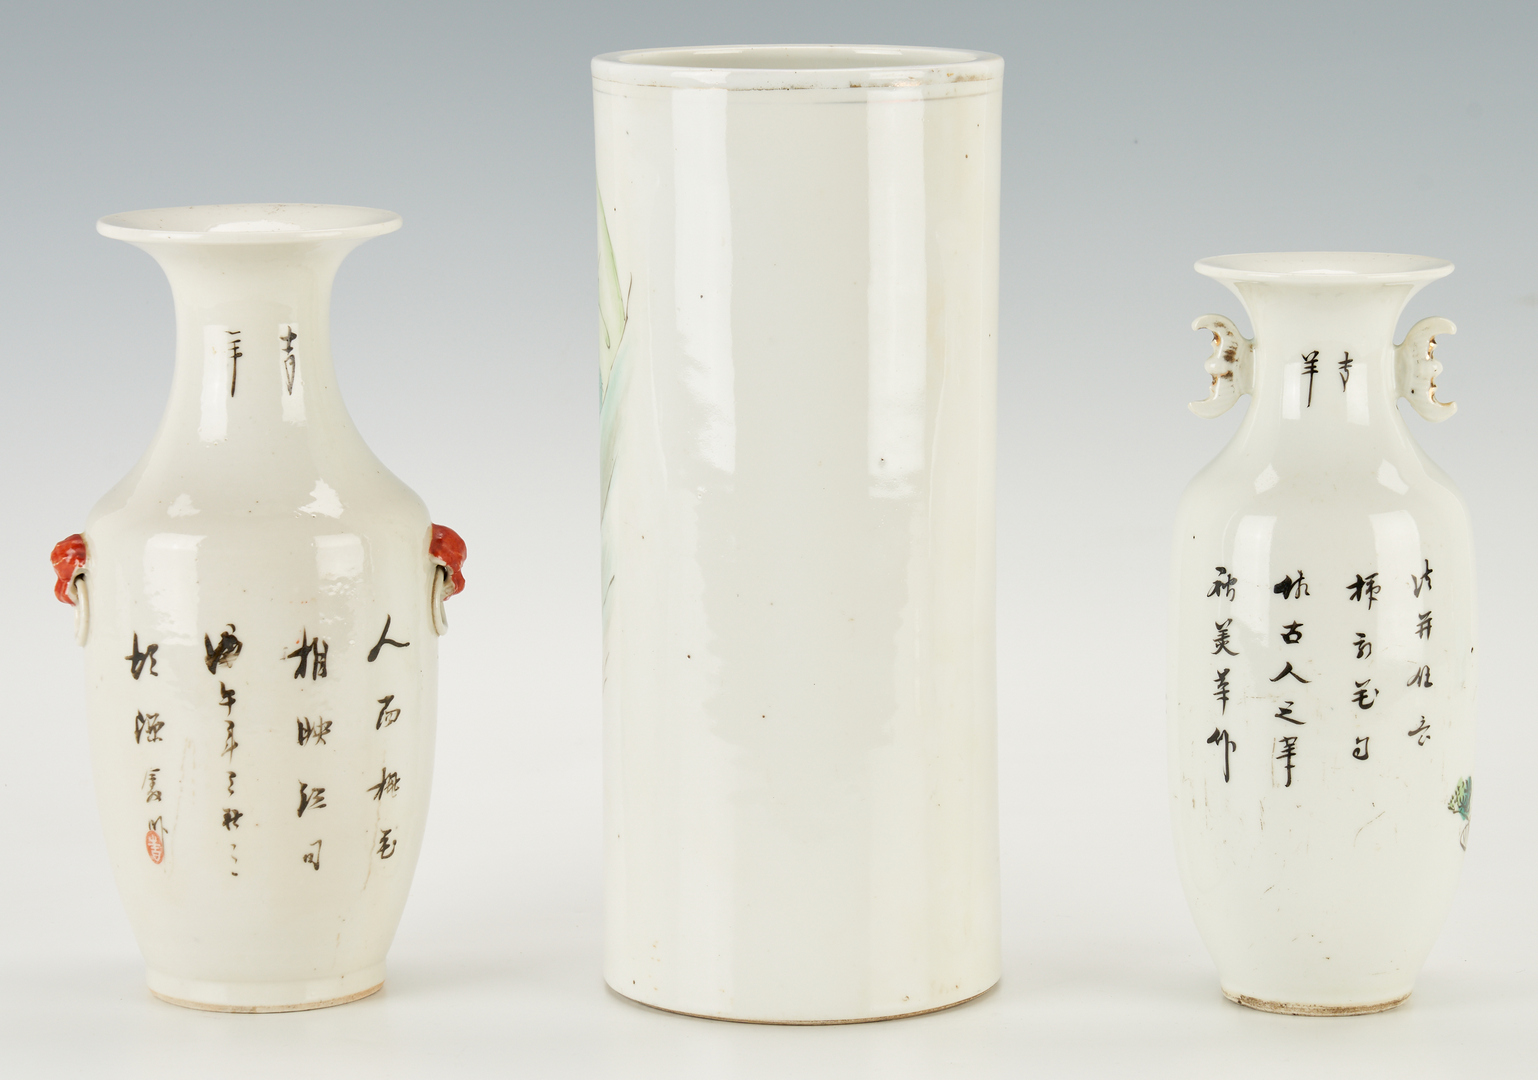 Lot 8: 3 Chinese Famille Rose Porcelain items, incl. 1 Hat Stand & 2 Vases